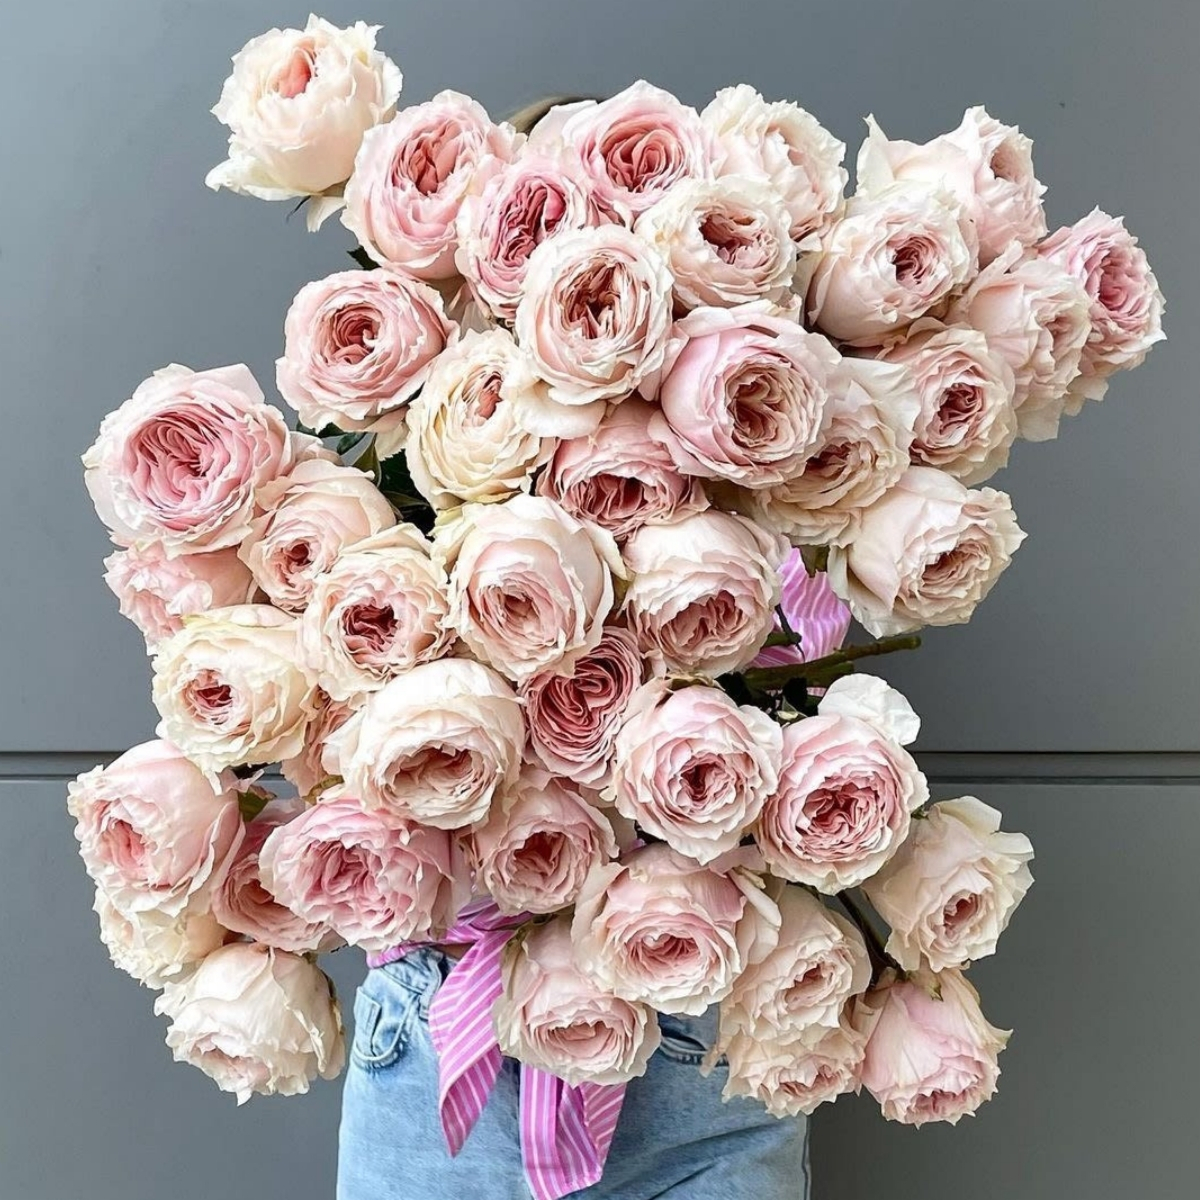 garden-roses-from-alexandra-farms-take-top-three-spots-in-proflora-variety-contest-featured